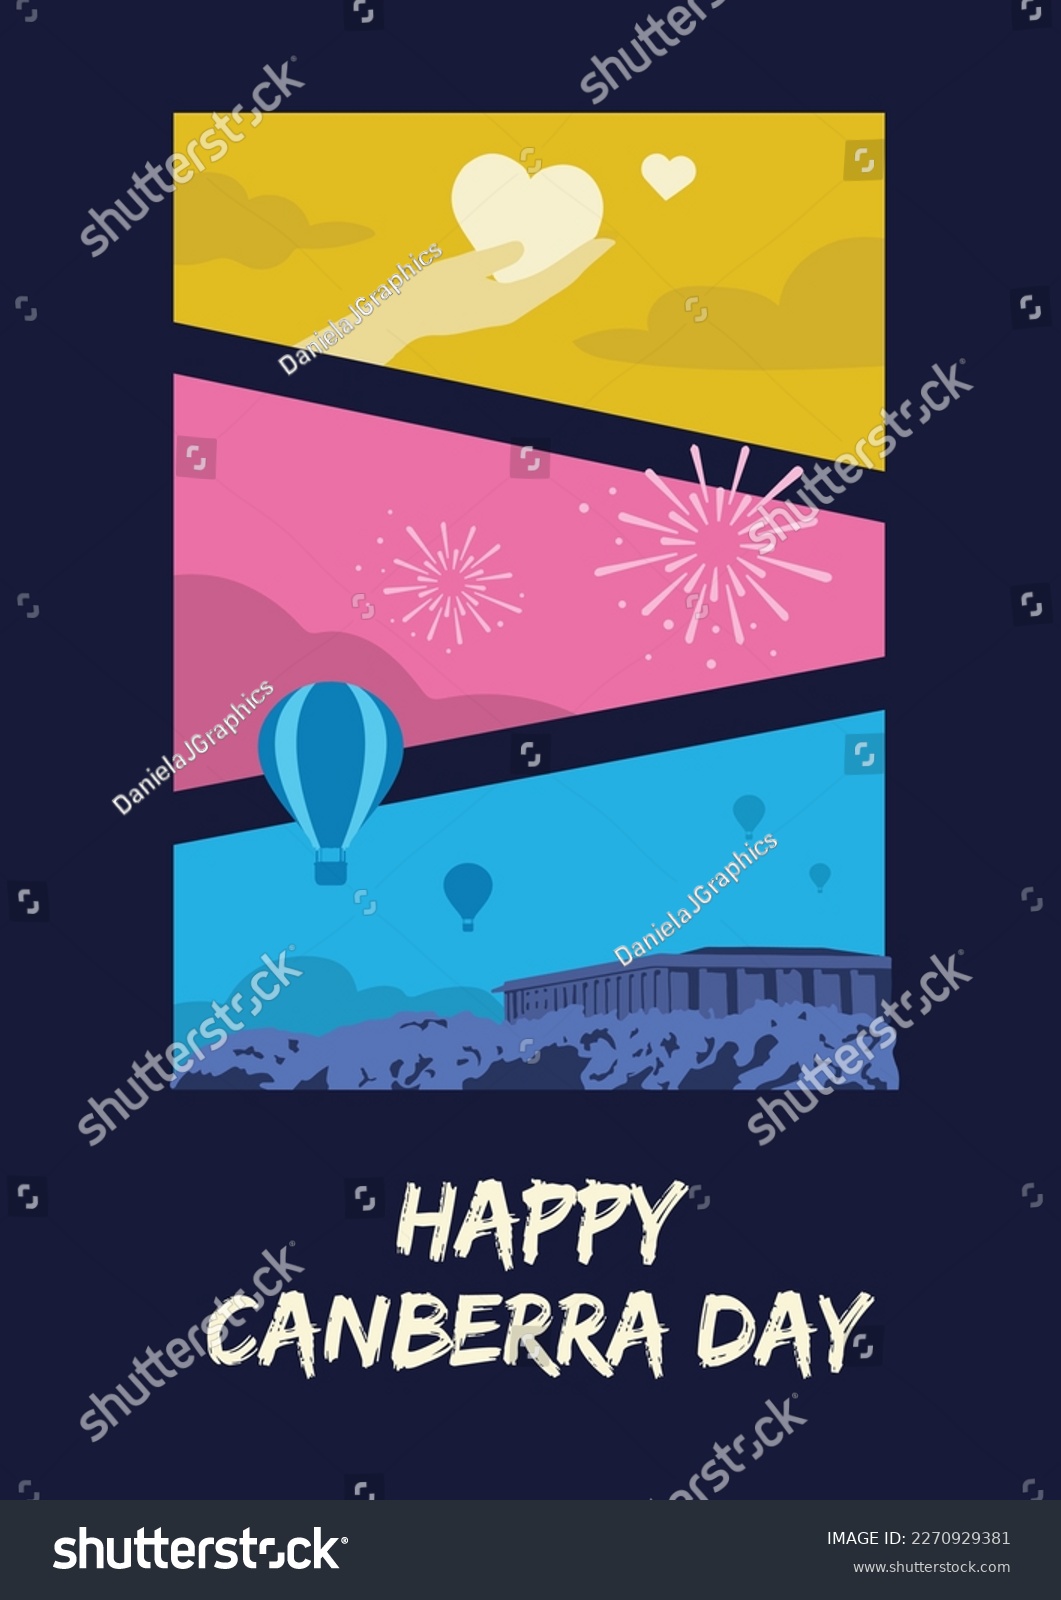 SVG of VECTORS. Editable poster for the Canberra Day in Australia. Balloon festival, giving day, charity, fireworks, light show, traditions svg